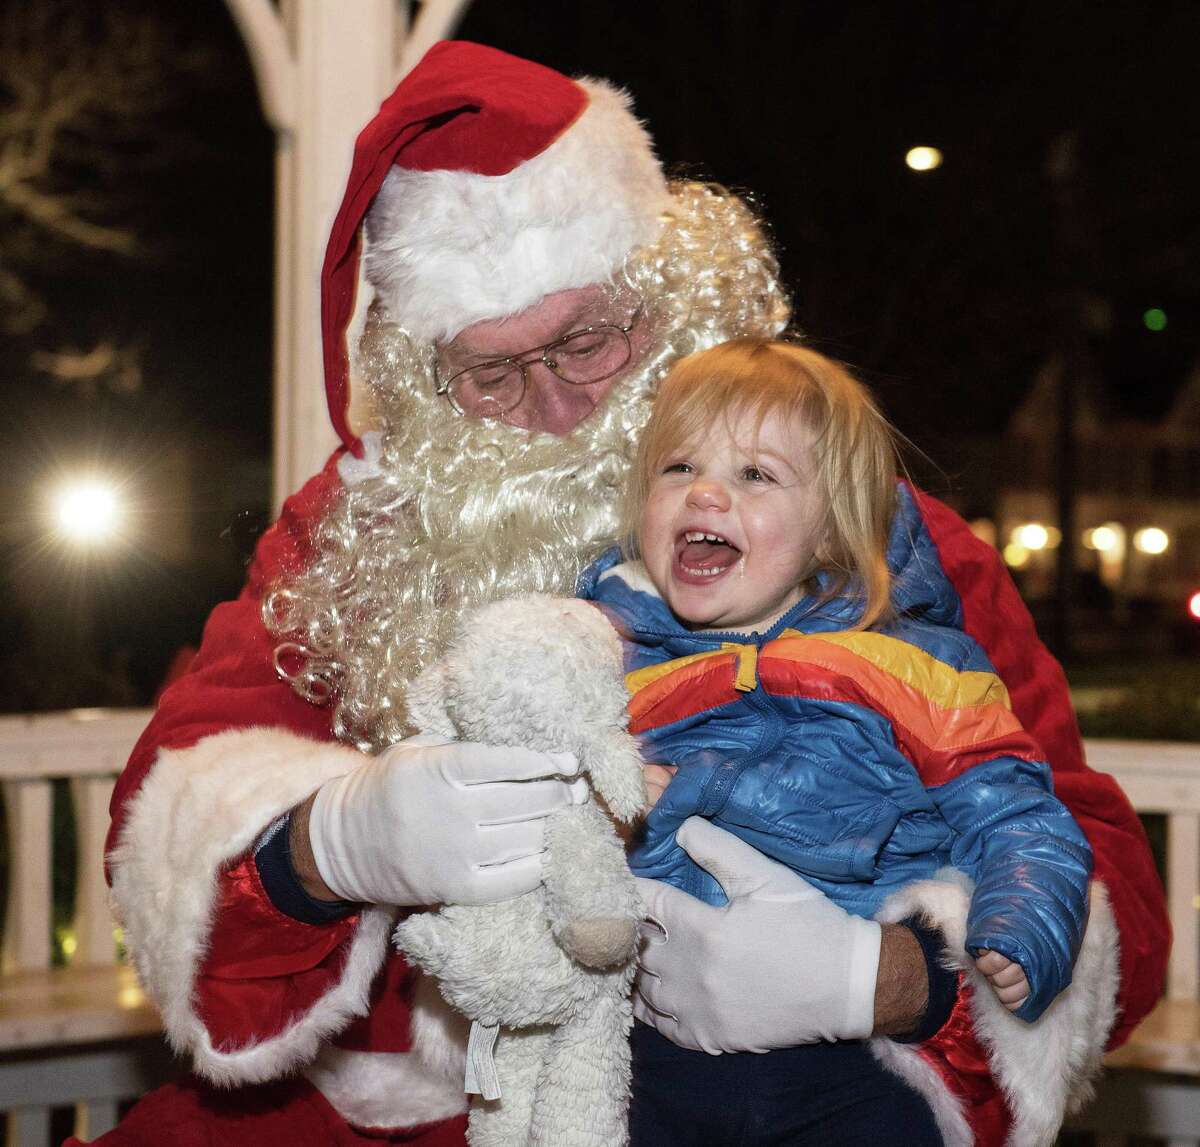 Francine Schwartz, 2, and her stuffed companion previously have a chat with Santa Claus at the annual Holiday Stroll event in Wilton Center, in a recent year. One of the upcoming happenings with the Wilton Library is a Stroll to the Library event from 5:30 to 7 p.m., on Friday, Dec. 3.